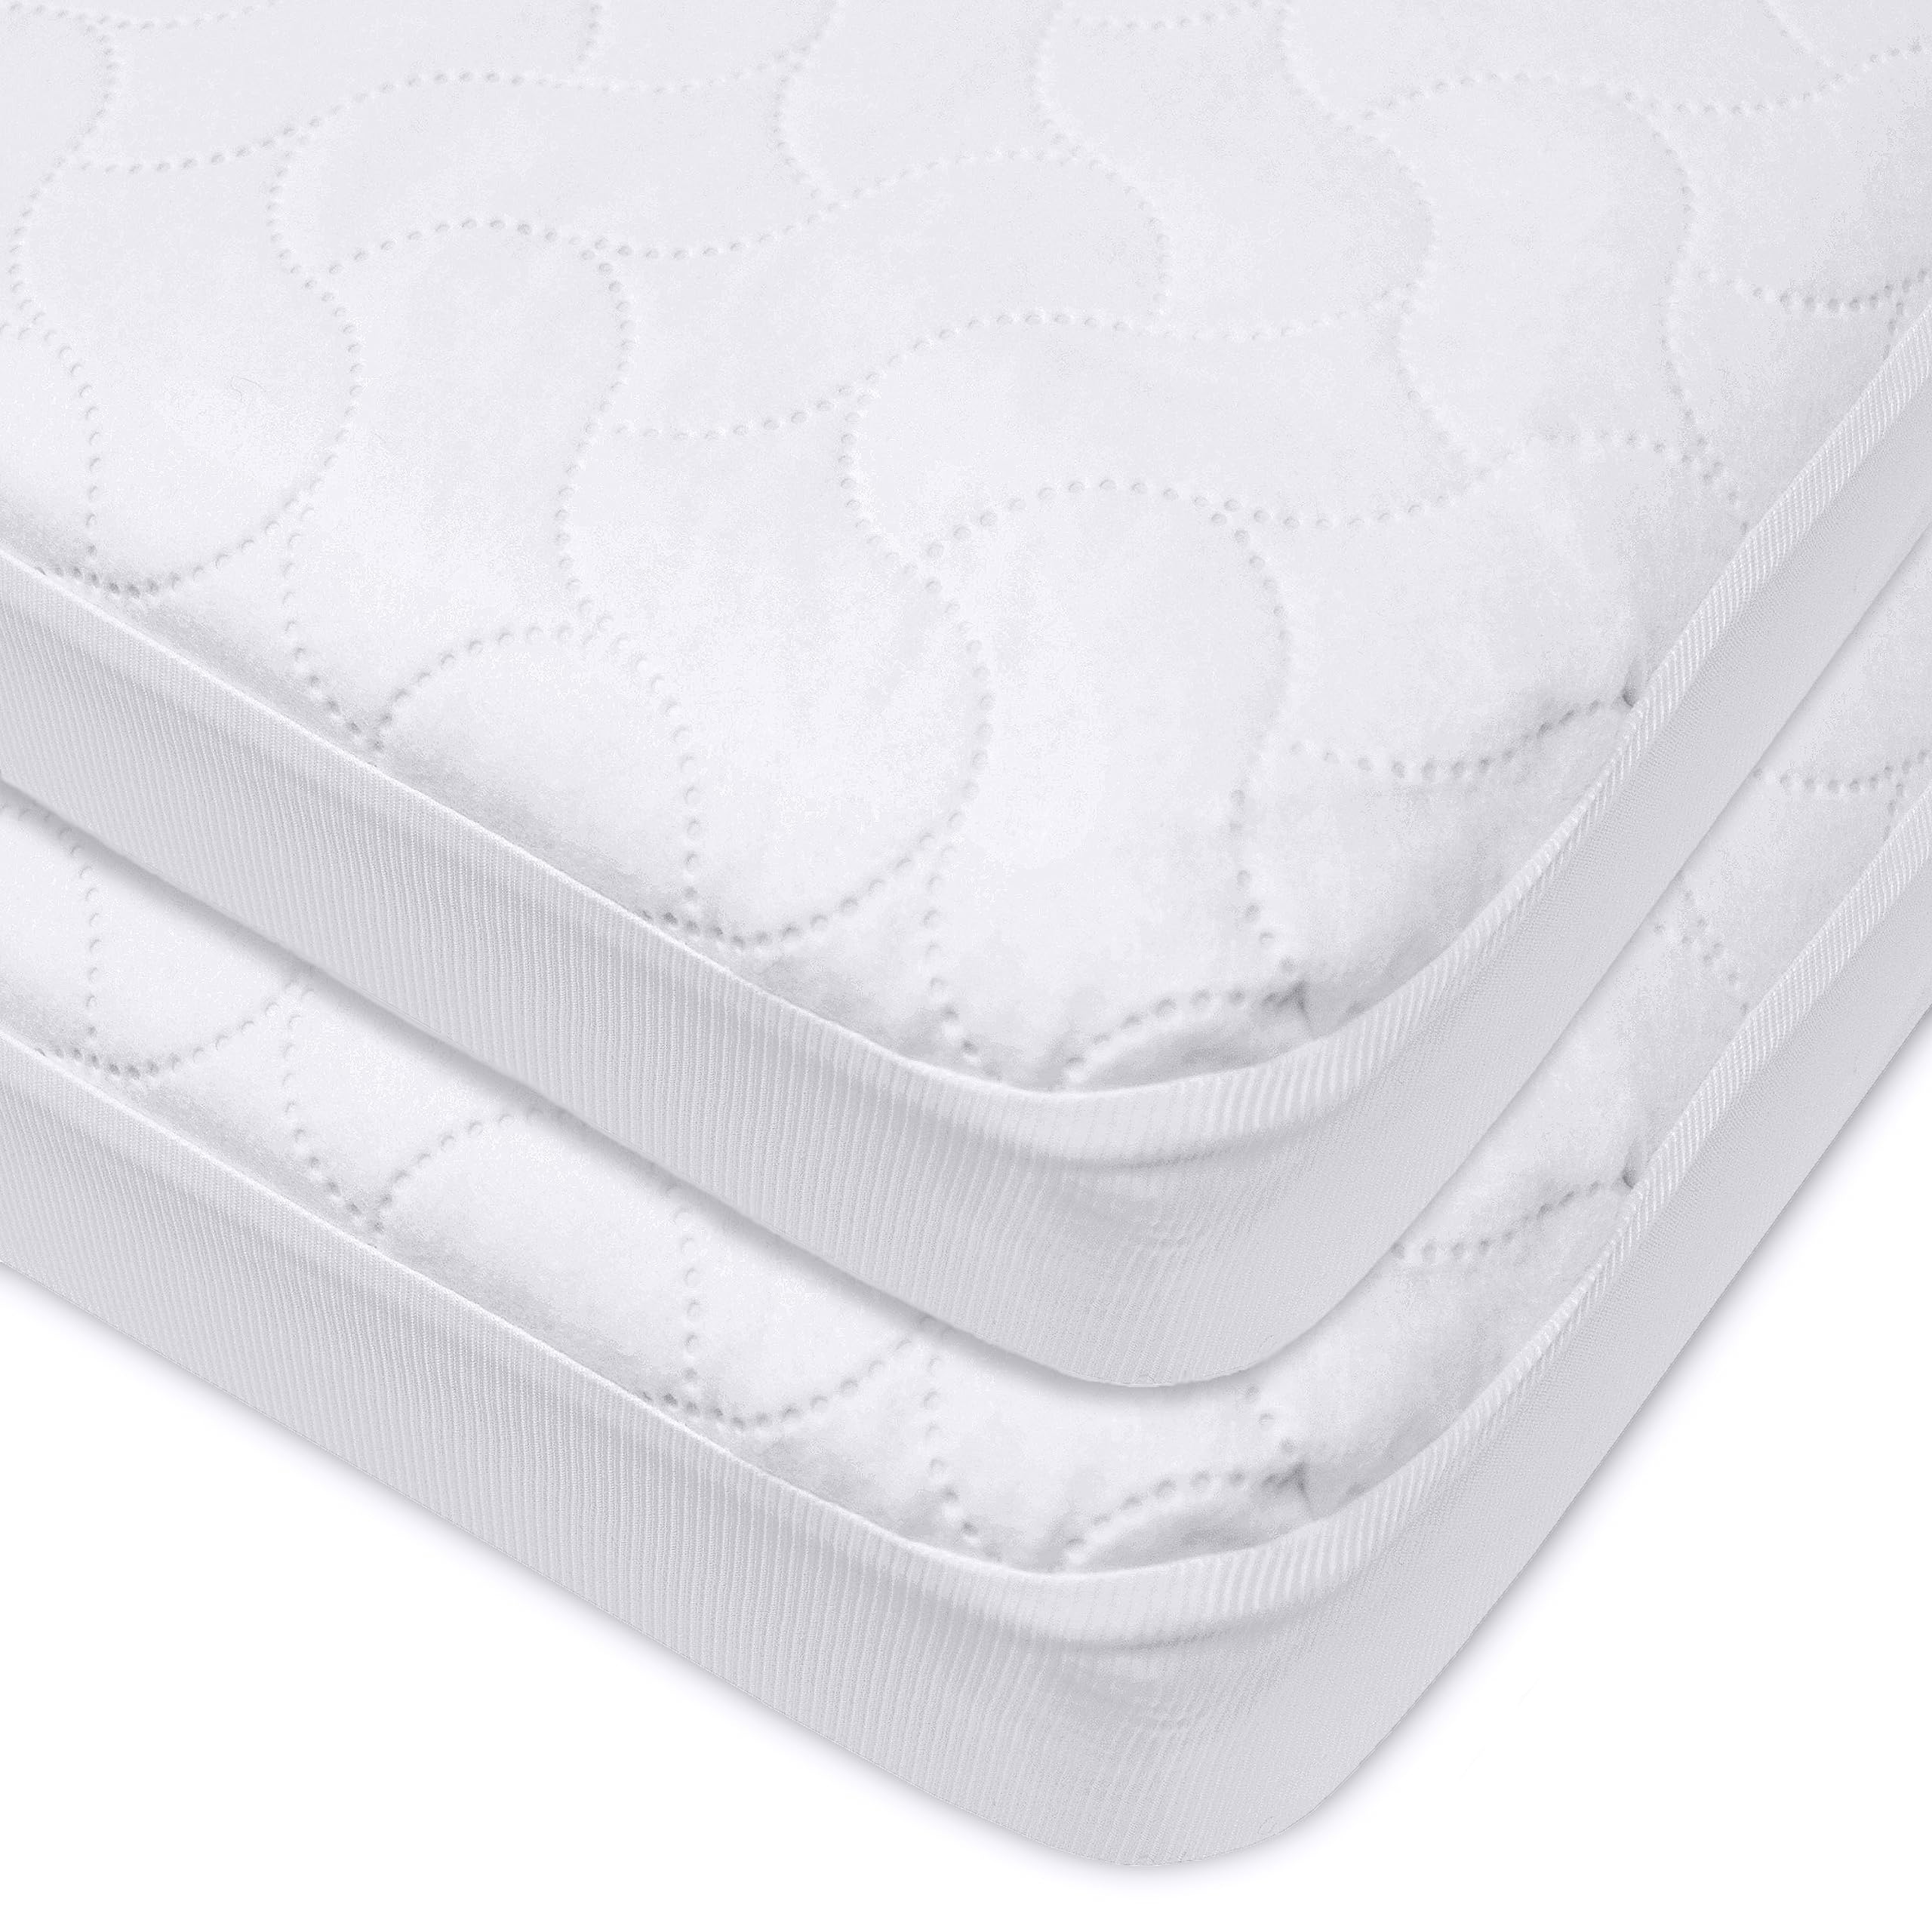 American Baby Company Waterproof Fitted Quilted Crib and Toddler Protective Pad Cover, White (Pack of 2), for Boys and Girls